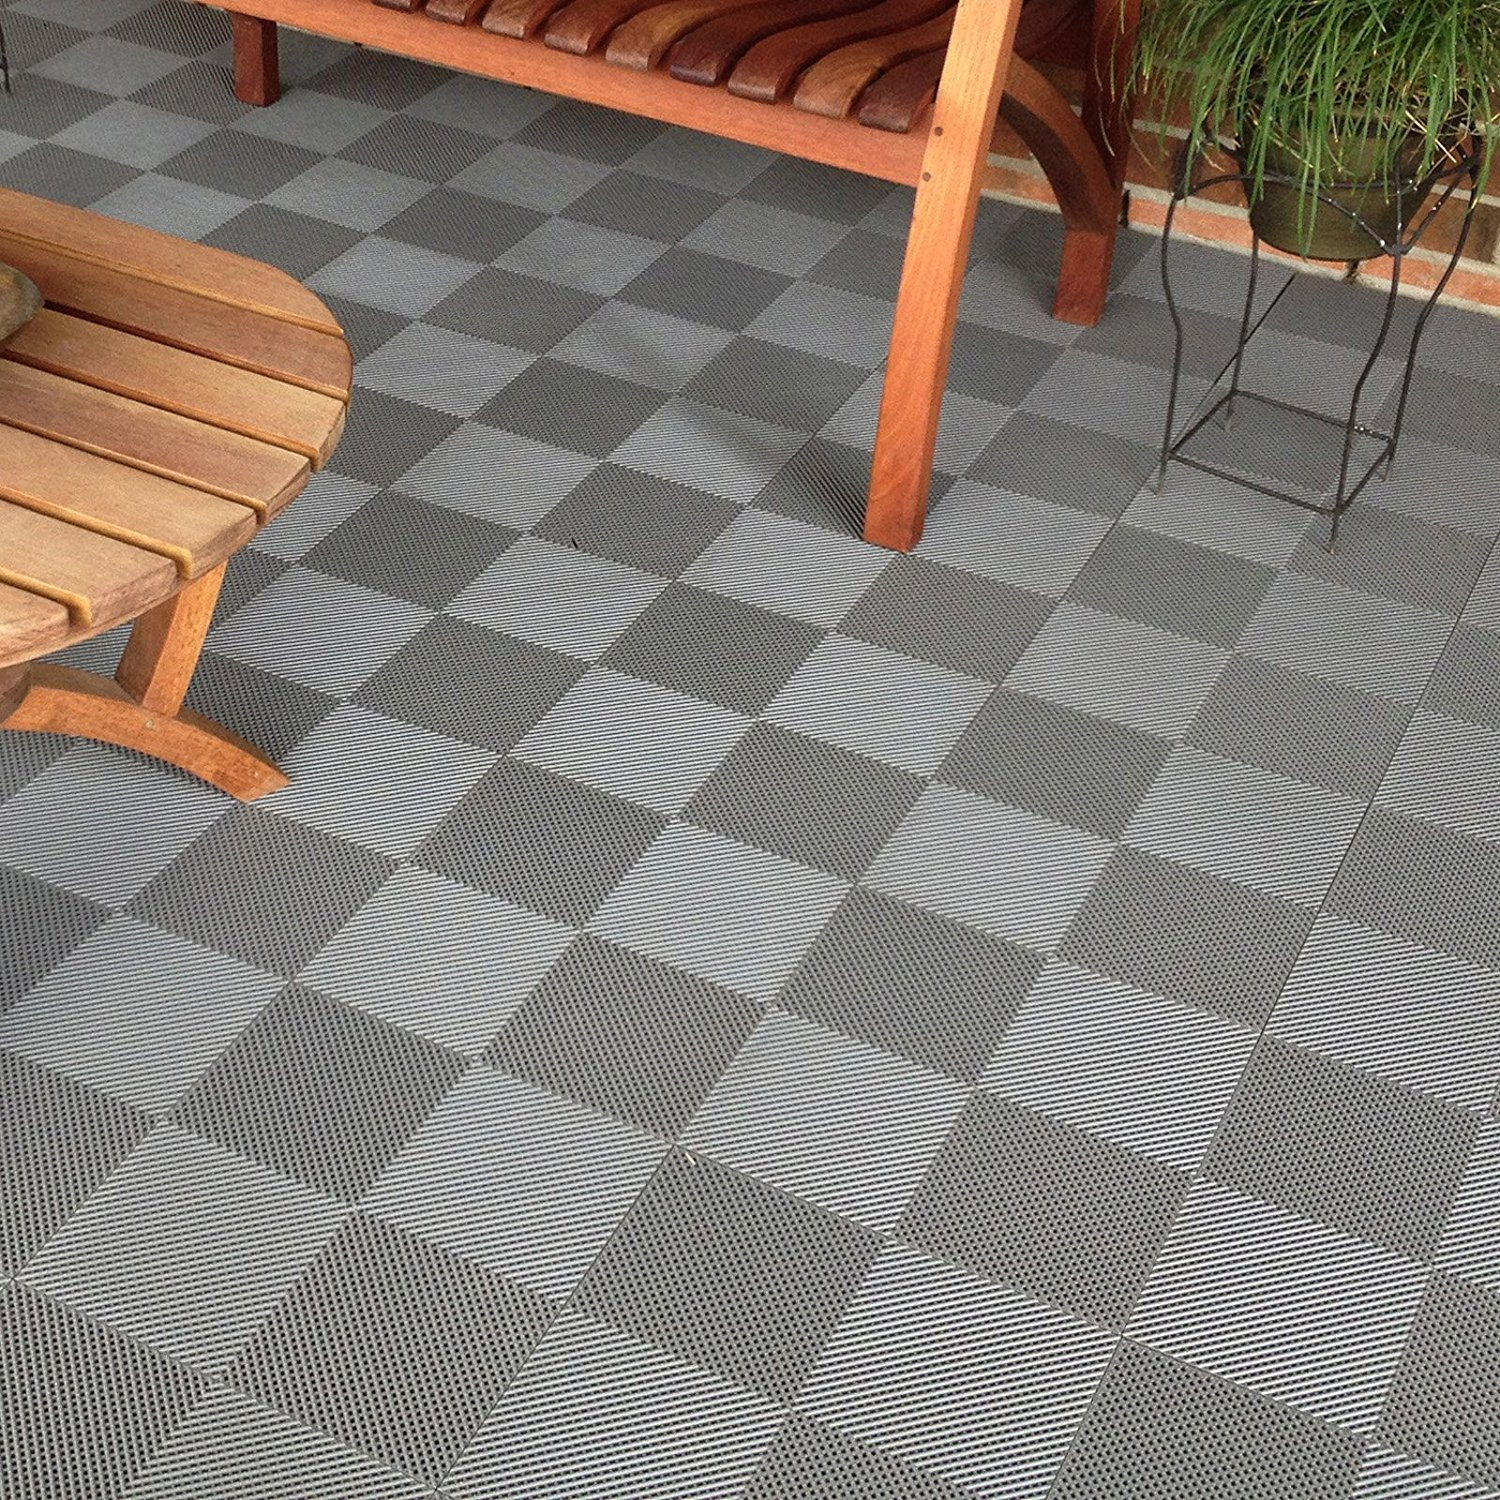 Outdoor Tiles The Tile Home Guide with dimensions 1500 X 1500